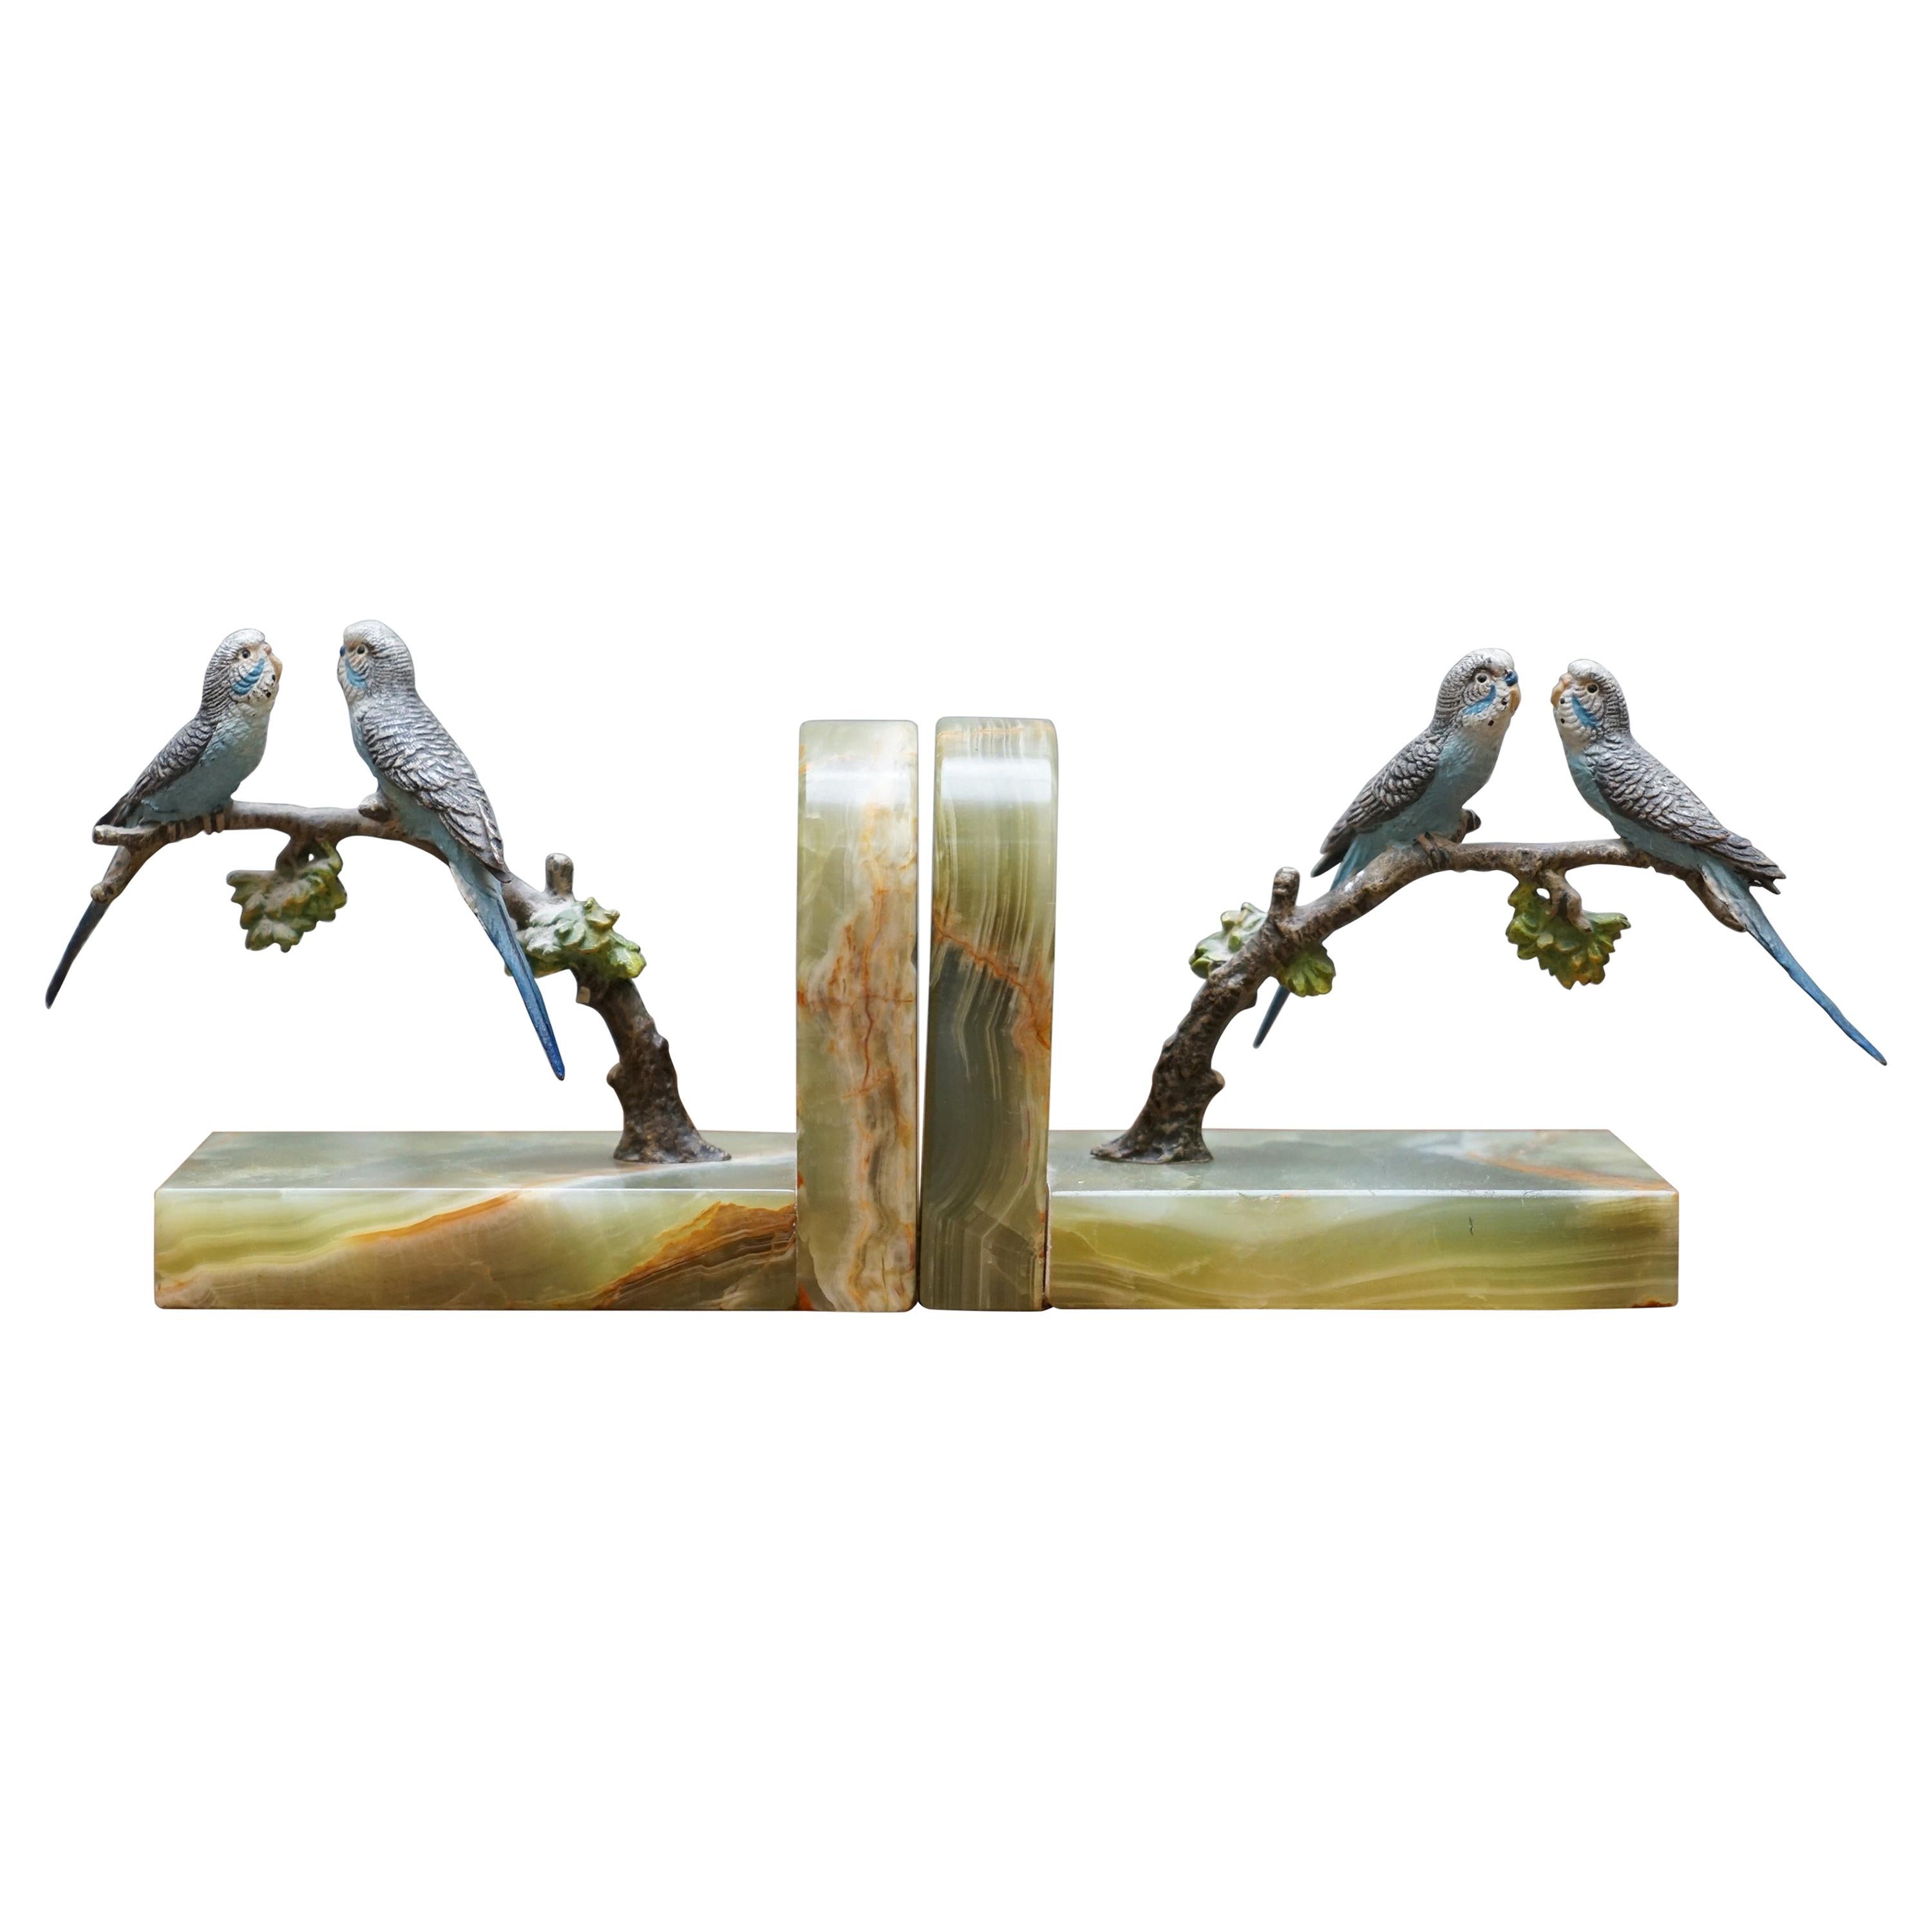 Pair of Rare 1920 Austrian Vienna Cold Painted Bronze Bookends Birds of Paradise